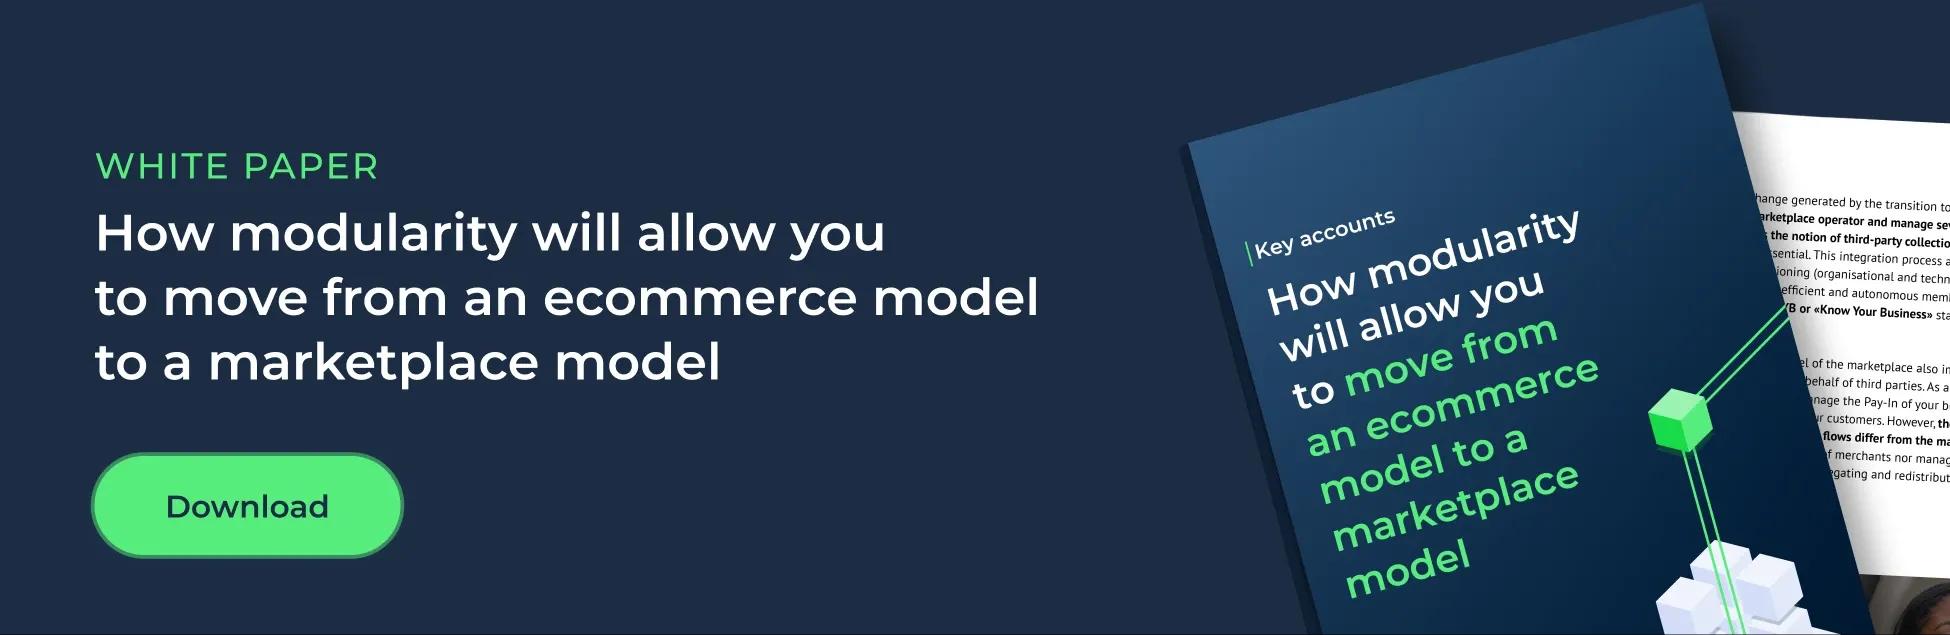 White paper Modularity: How to move from an e-commerce model to a marketplace model